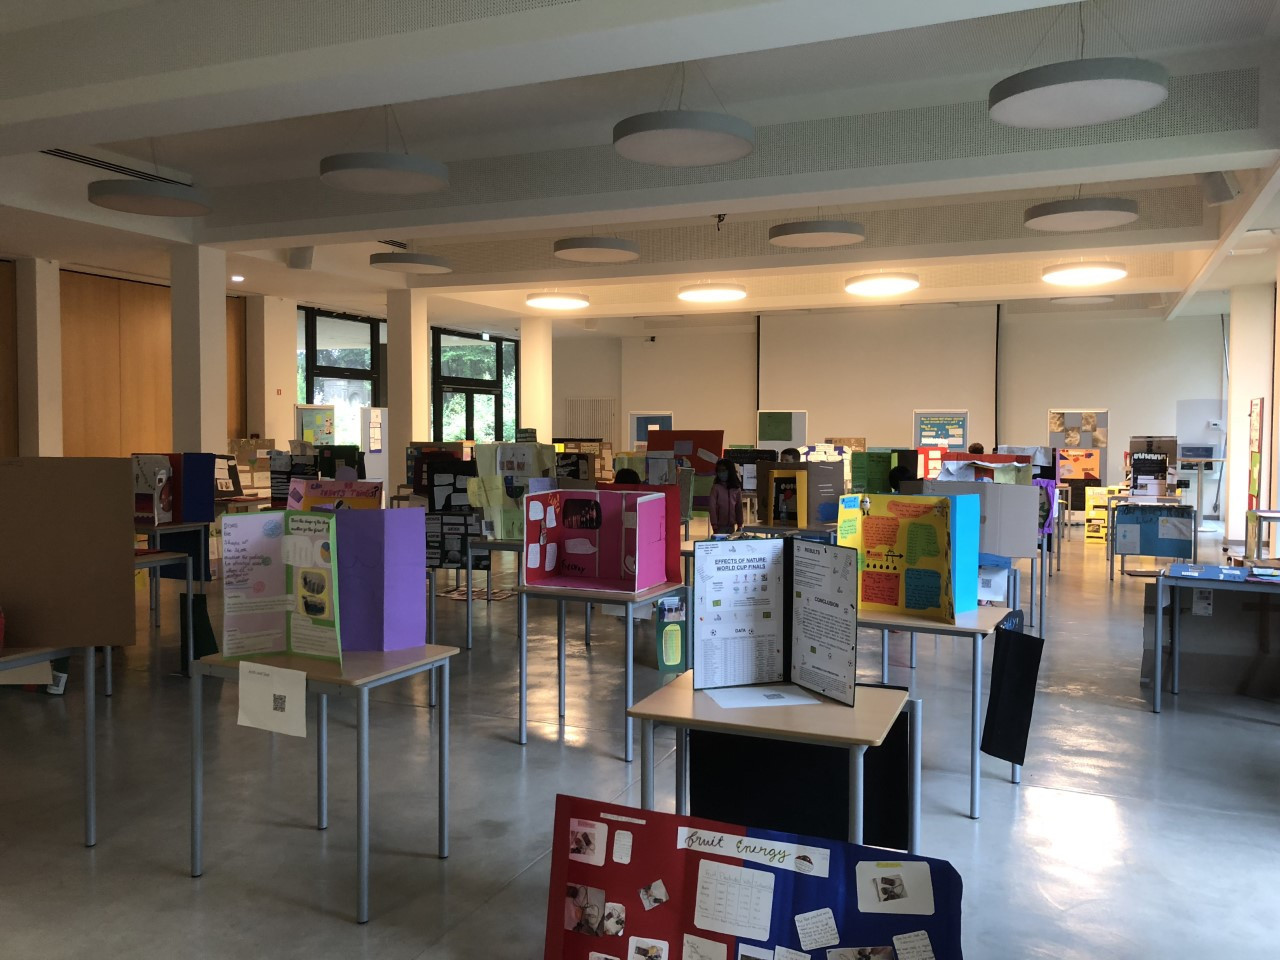 Student science exhibitions are pictured in a classroom Lycée Michel Lucius